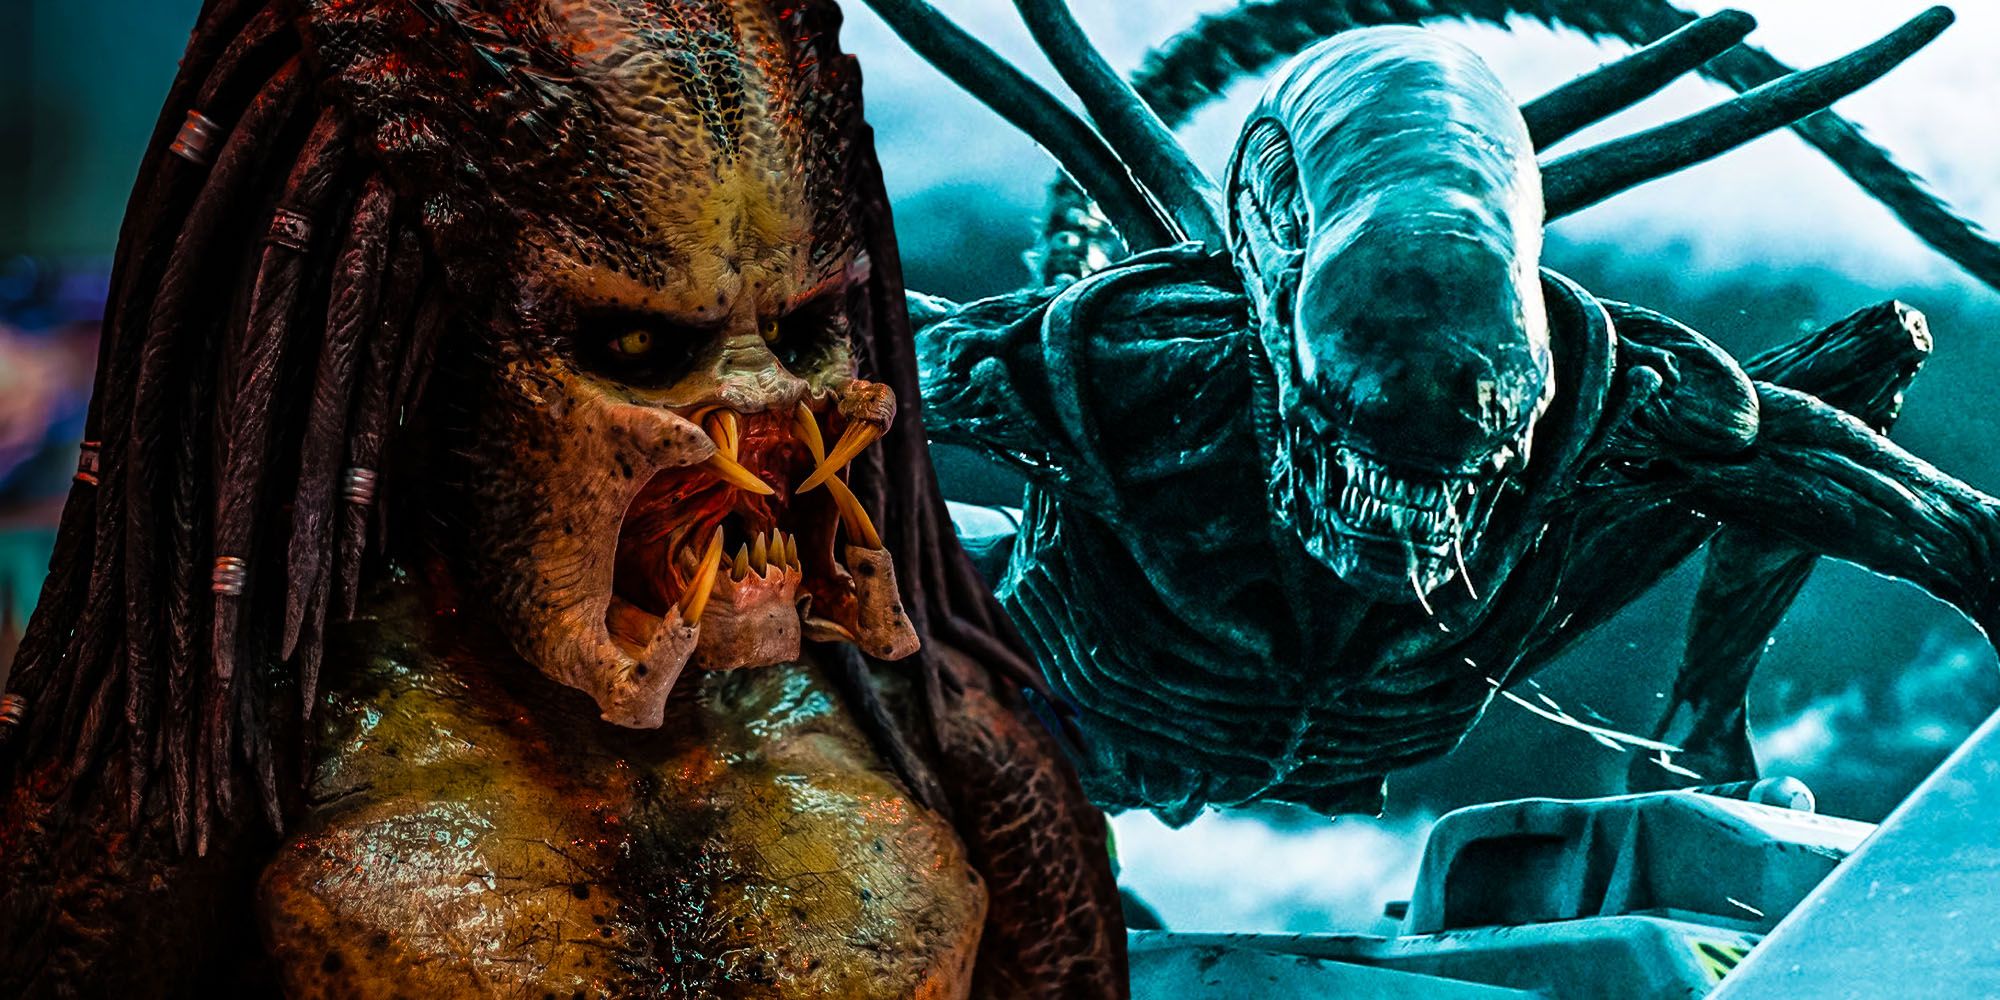 Which is the better sci fi franchise? Alien or Predator? - Quora